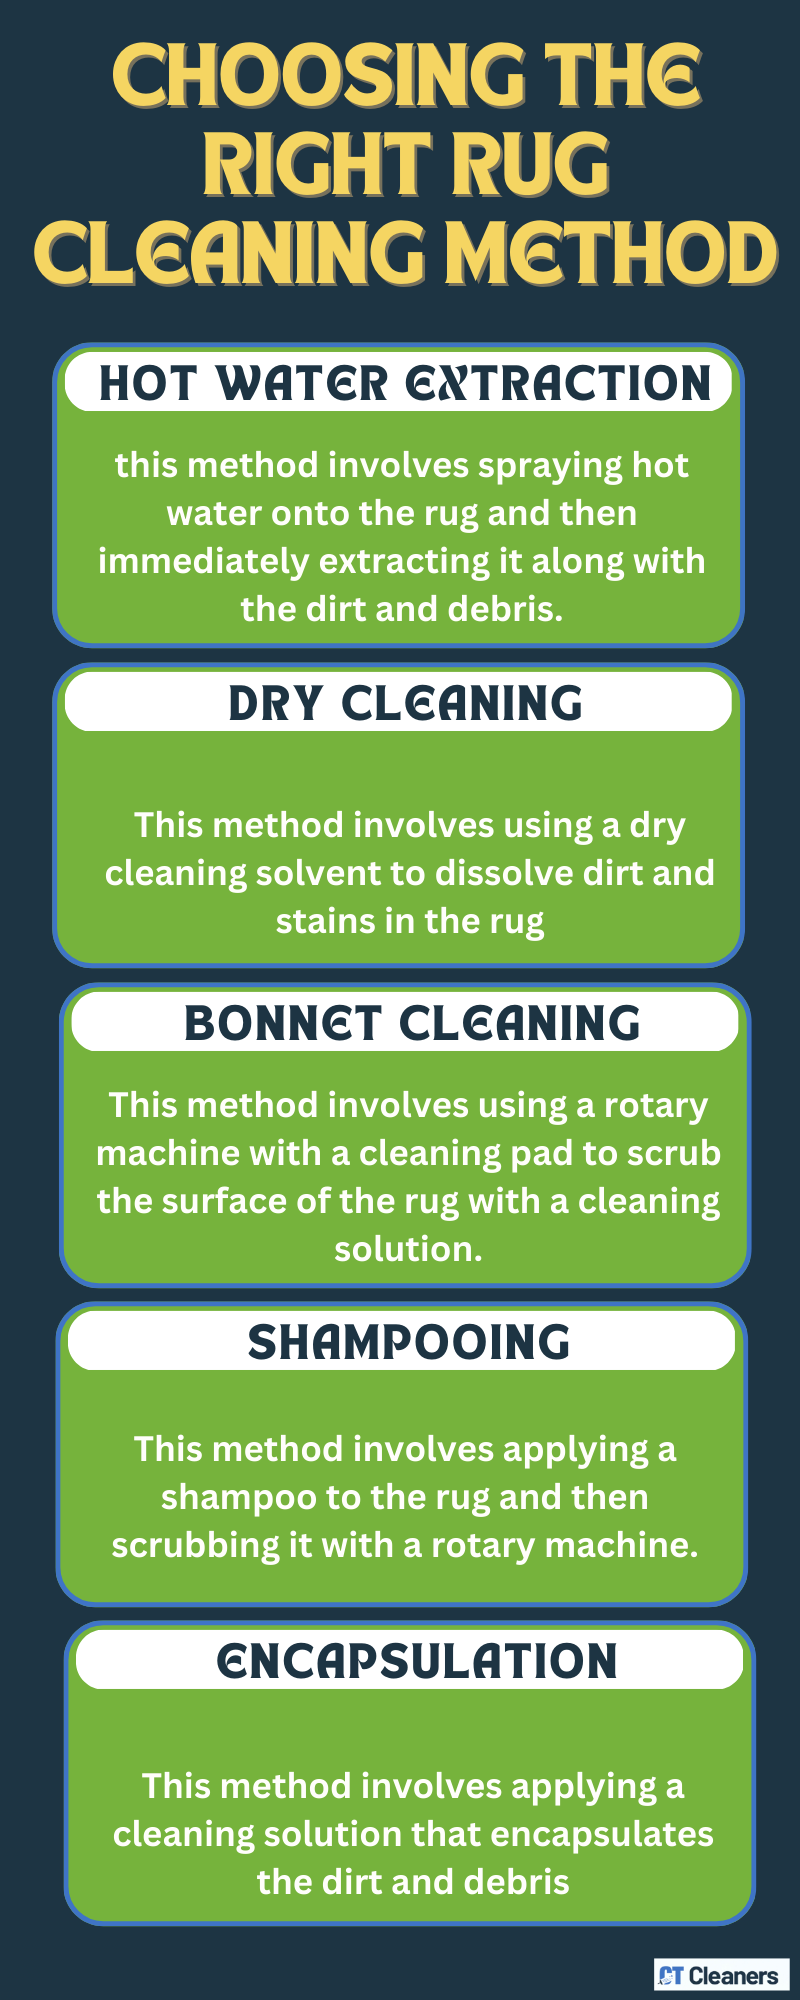 Choosing the Right Rug Cleaning Method